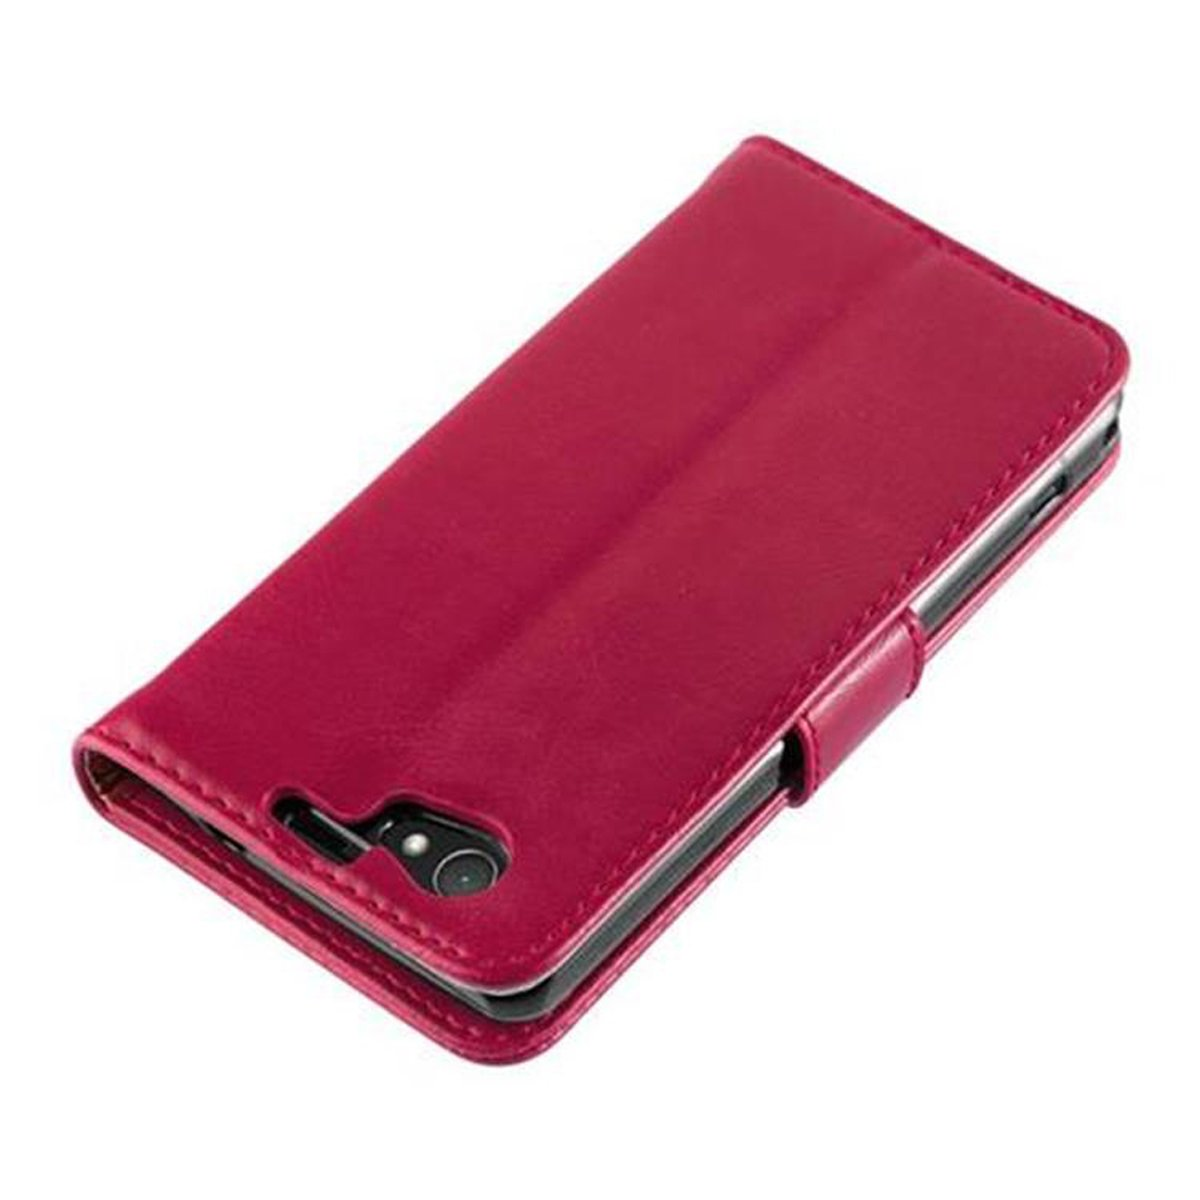 Style, Sony, Luxury Hülle WEIN Book COMPACT, Xperia Z1 ROT CADORABO Bookcover,